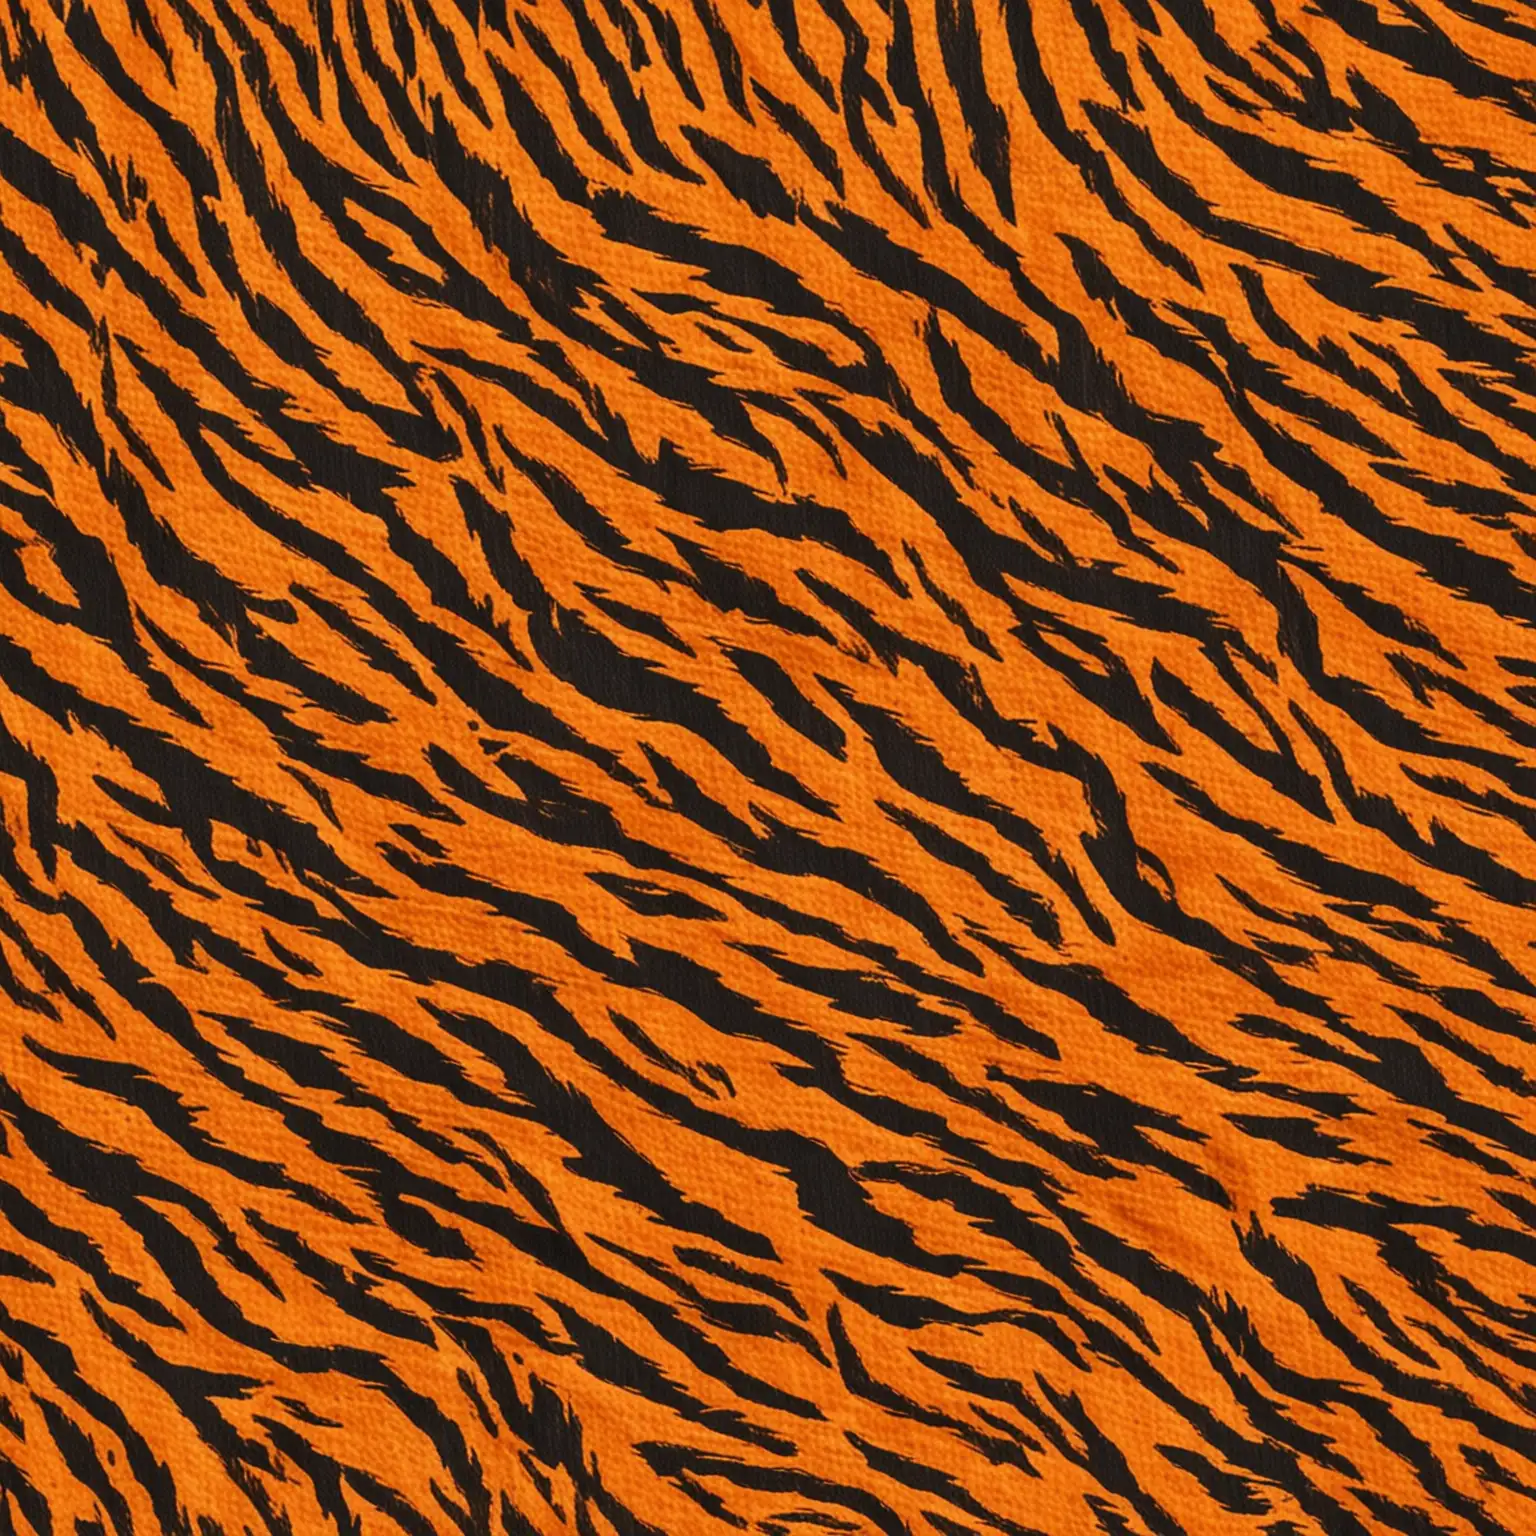 Repetitive Orange Tiger Stripes Pattern for Fabric Printing